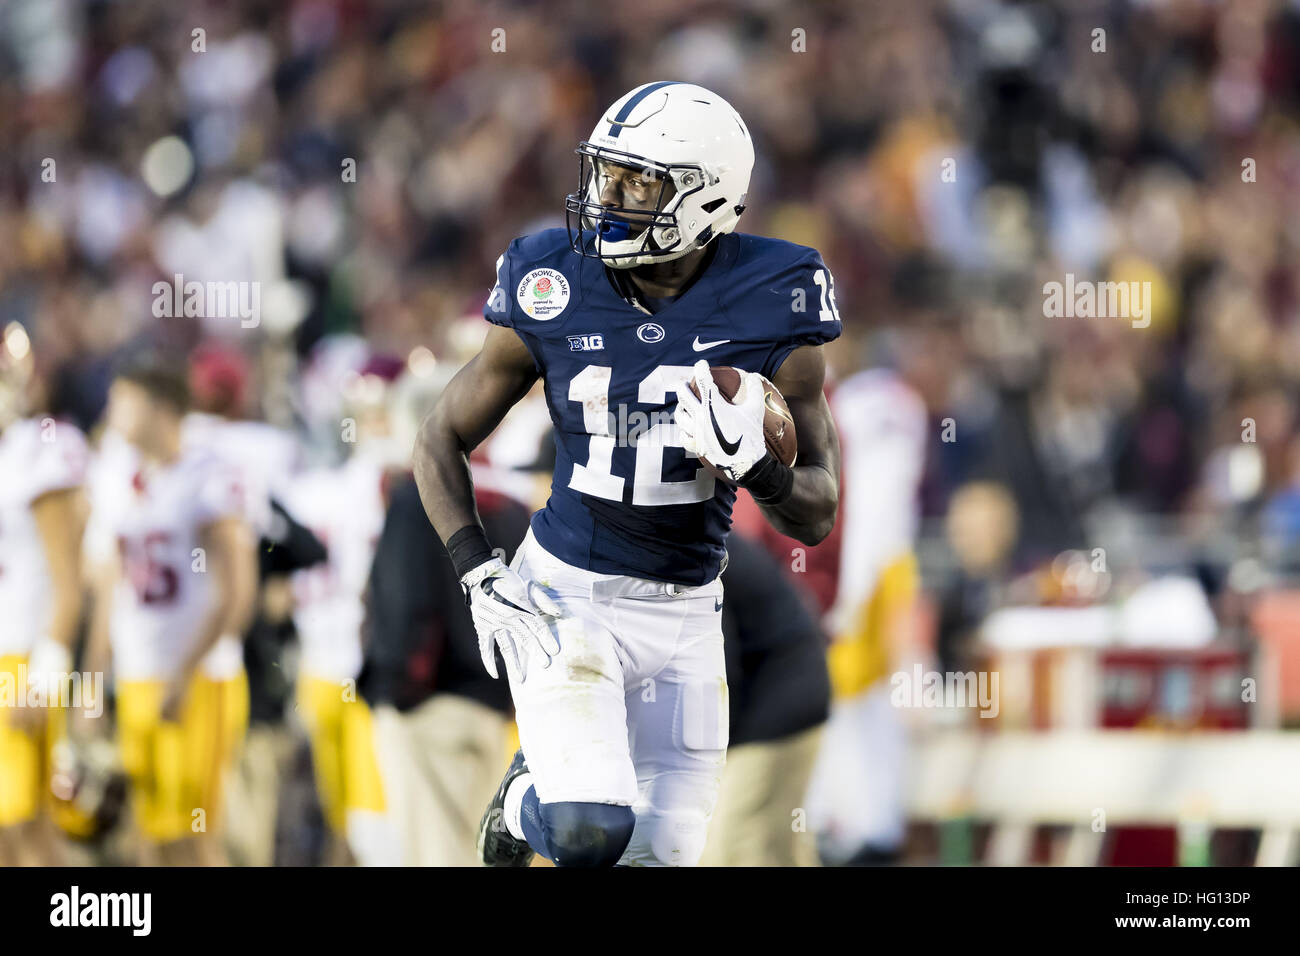 California, USA. 2nd Jan, 2017.  Penn State wide receiver Chris Godwin (12) with an amazing touchdown reception over USC defensive back Iman Marshall (8) in the second half during the Rose Bowl Game between Penn State Nittany Lions and University of Southern California Trojans at Rose Bowl Stadium in Pasadena, California. USC won 52-49. © Scott Taetsch/ZUMA Wire/Alamy Live News Stock Photo